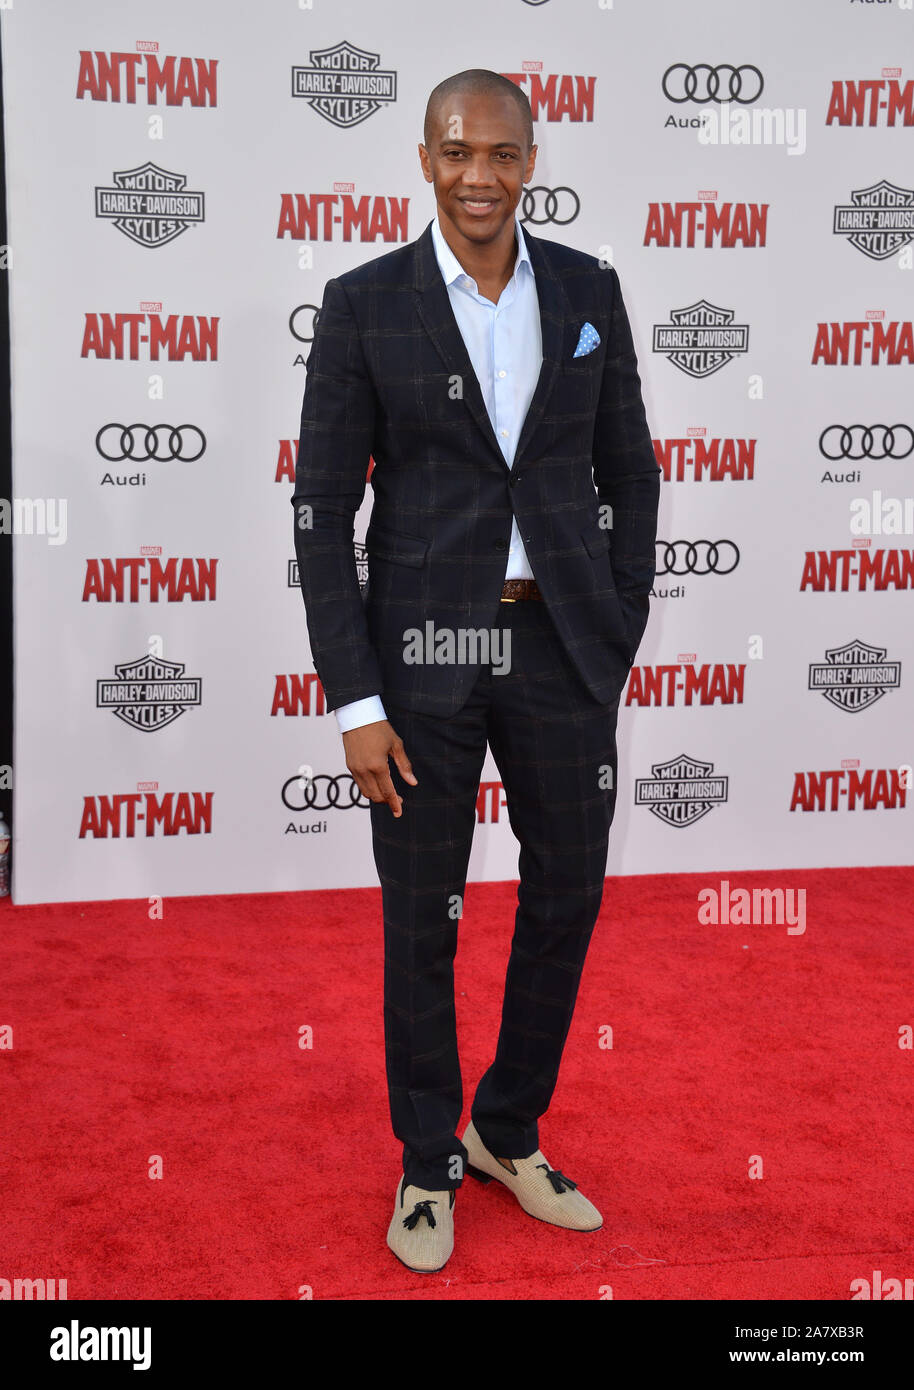 LOS ANGELES, CA - JUNE 29, 2015: Actor J. August Richards at the world premiere of 'Ant-Man' at the Dolby Theatre, Hollywood. © 2015 Paul Smith / Featureflash Stock Photo